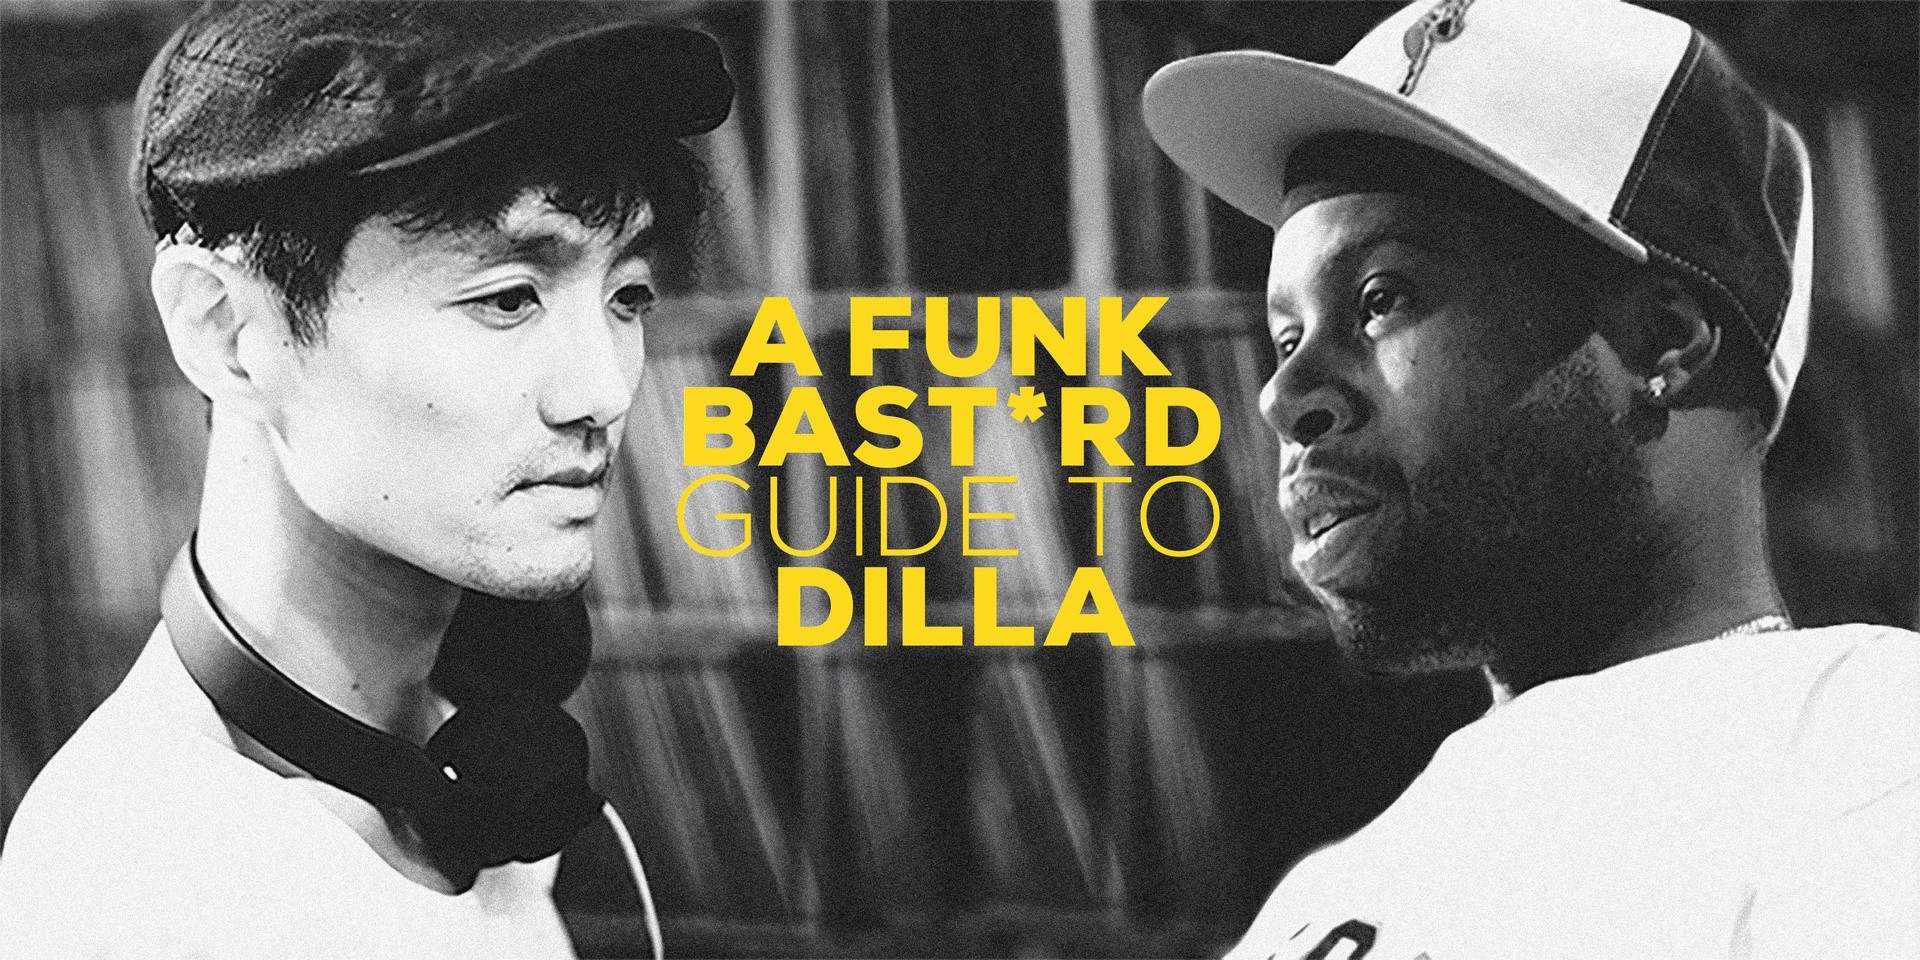 J Dilla Changed My Life: A Funk Bast*rd guide to Dilla's most neccessary tracks